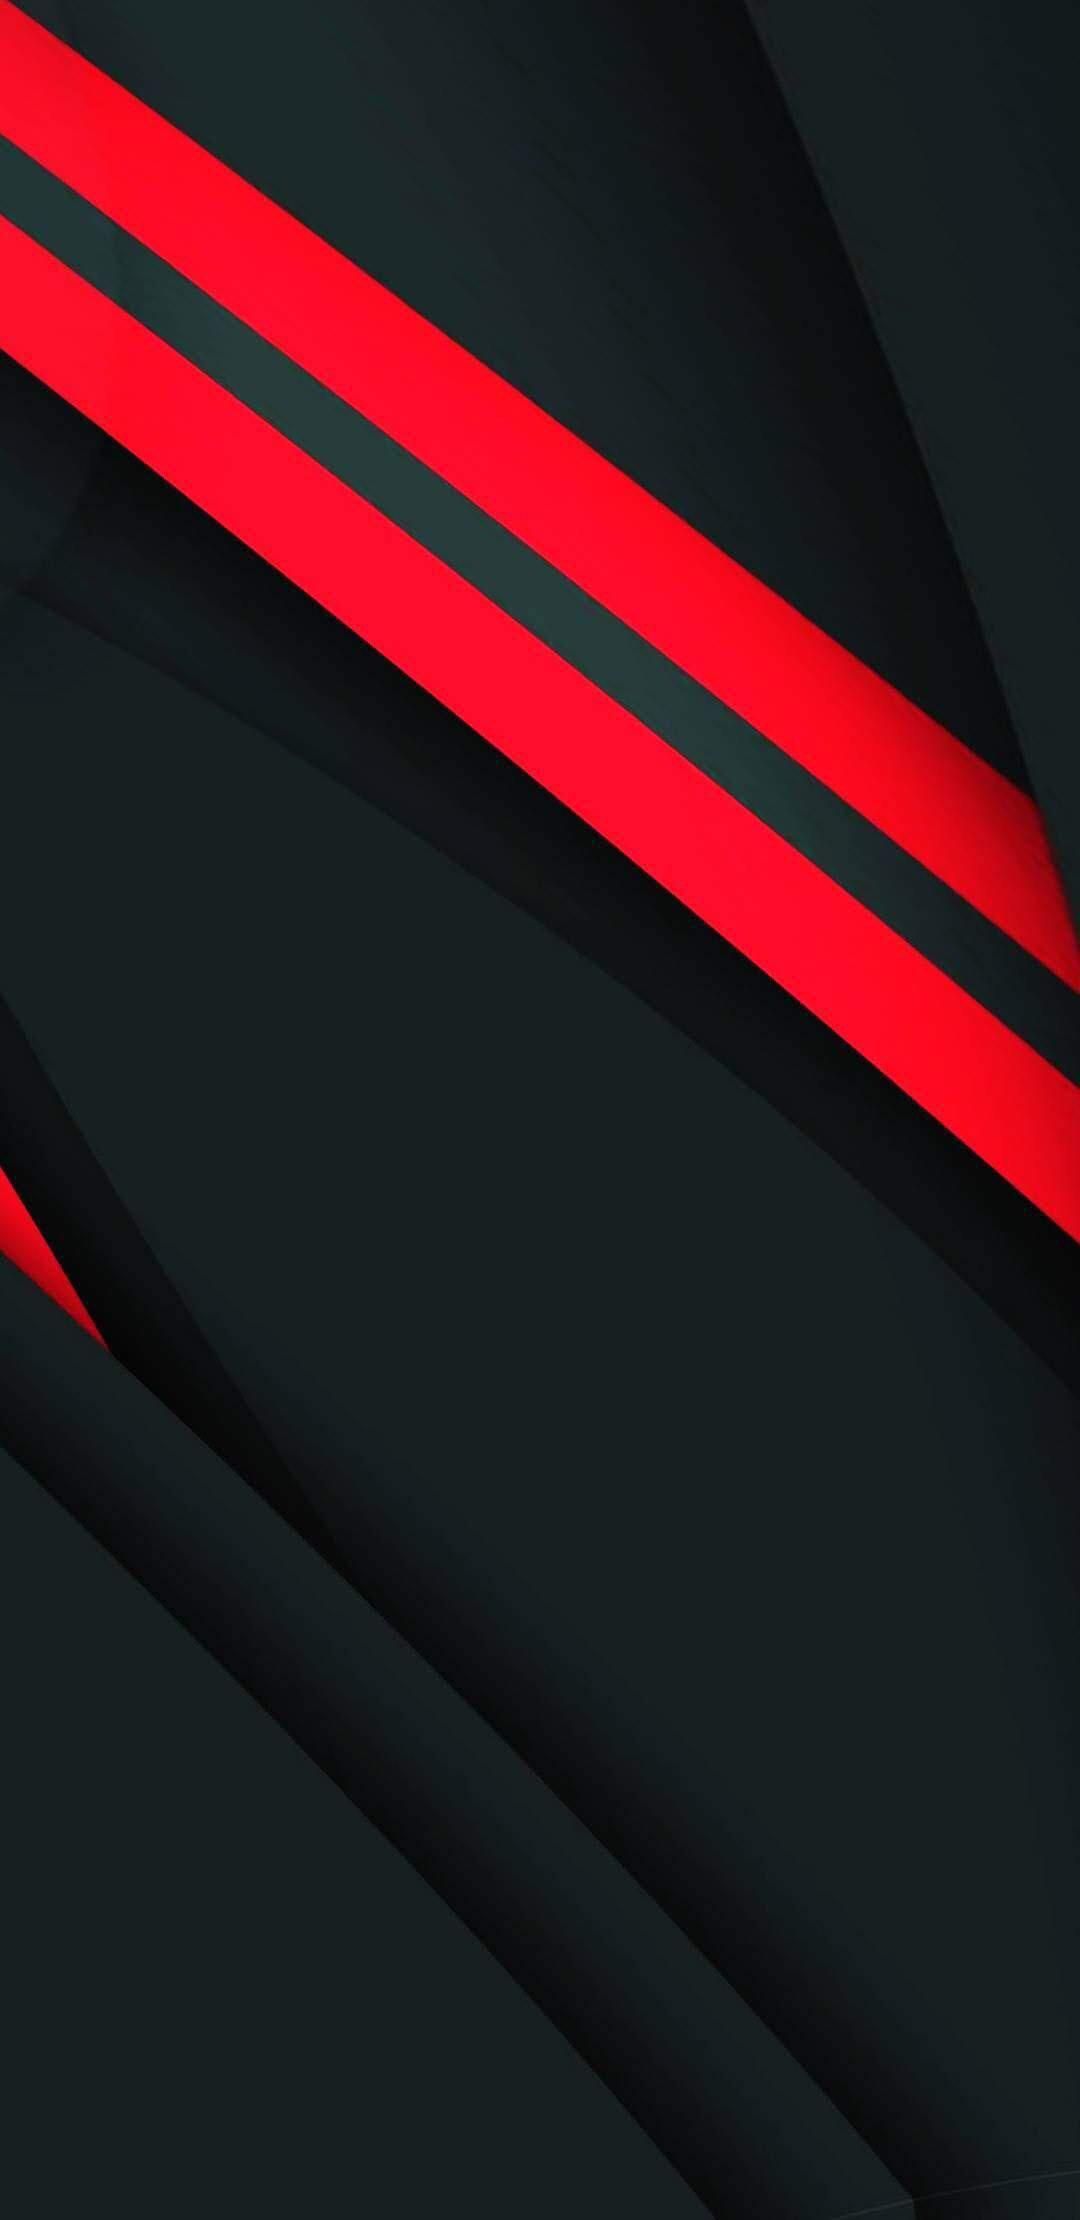 Clean Red Stripes And Black Wallpaper